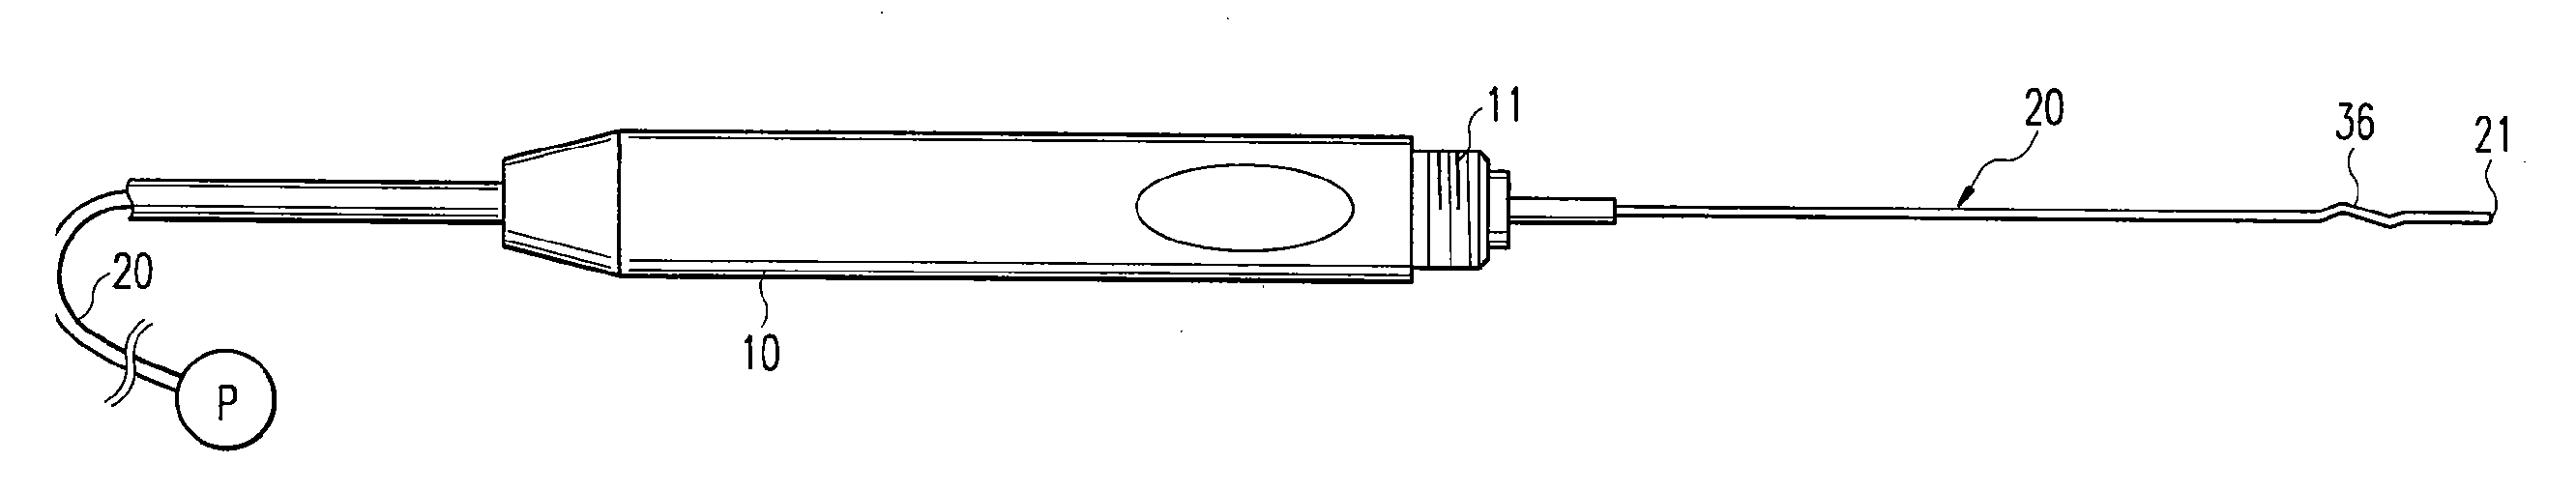 Applicator For Water-Jet Surgery